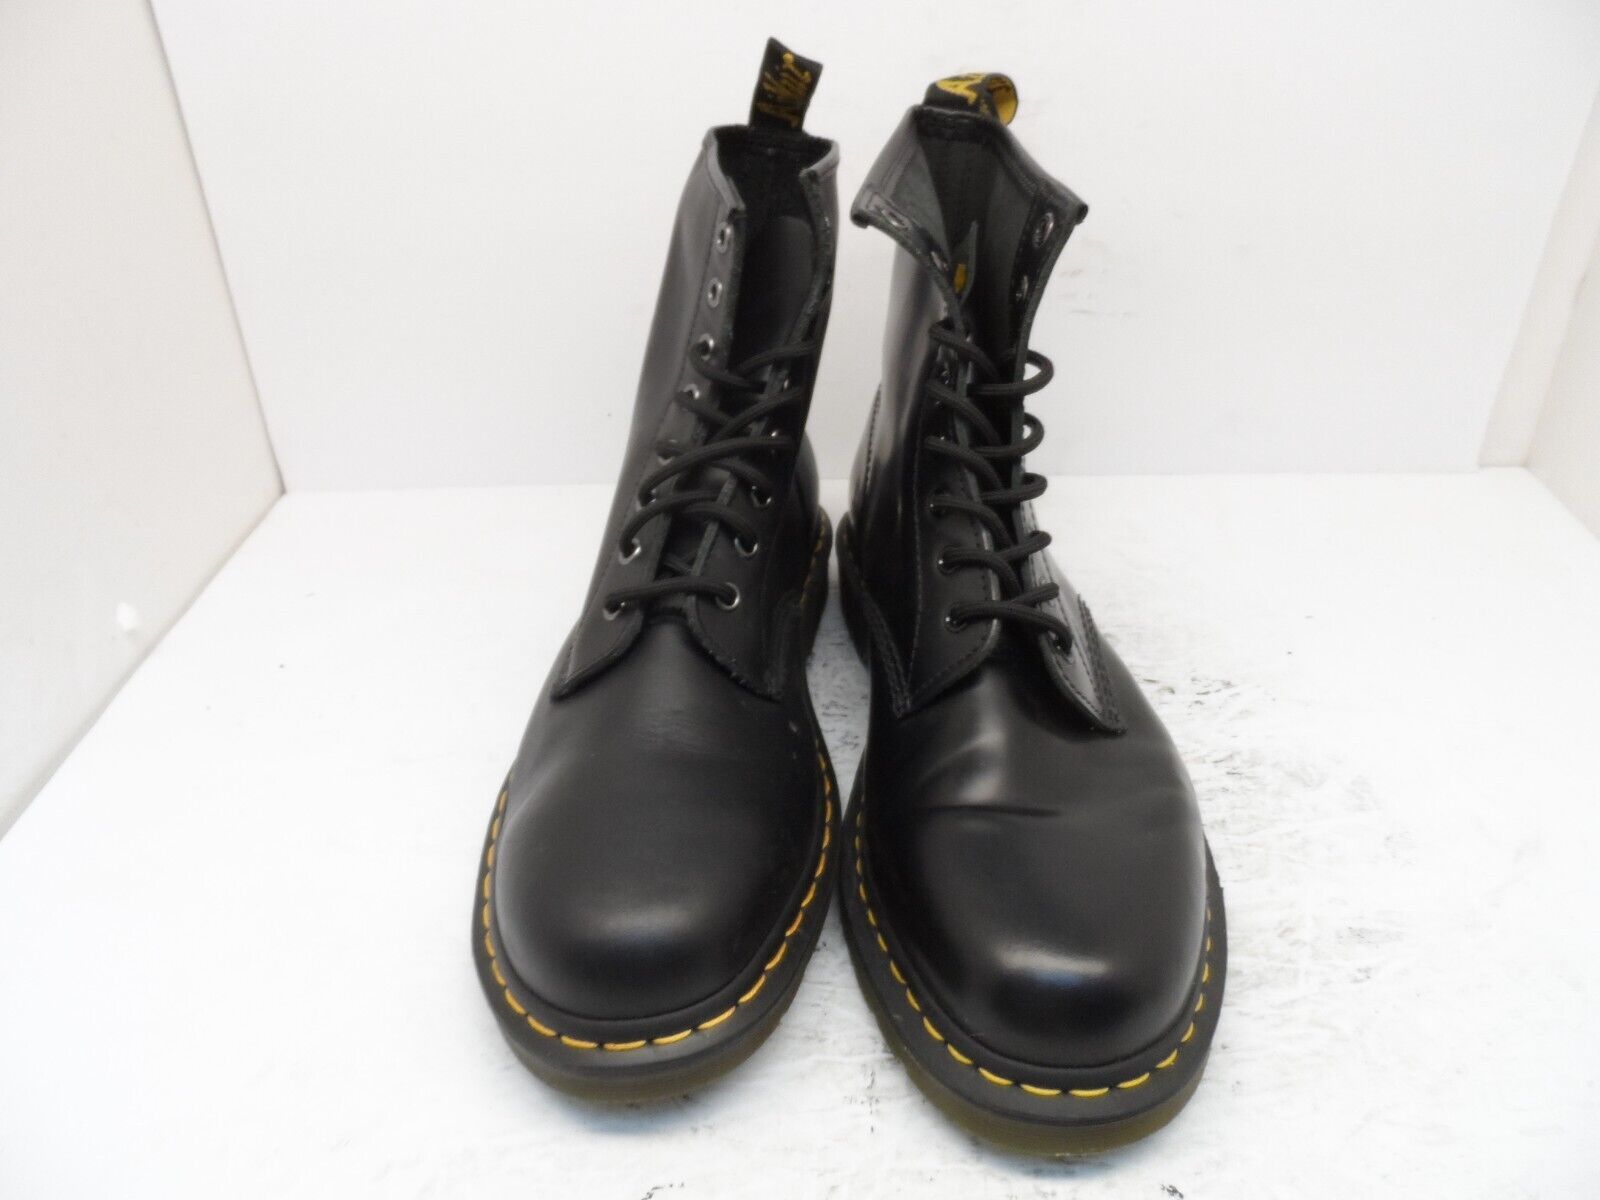 Primary image for Dr. Martens Men's 8-Eye Casual Service Boots 1466 Black Leather Size 12M